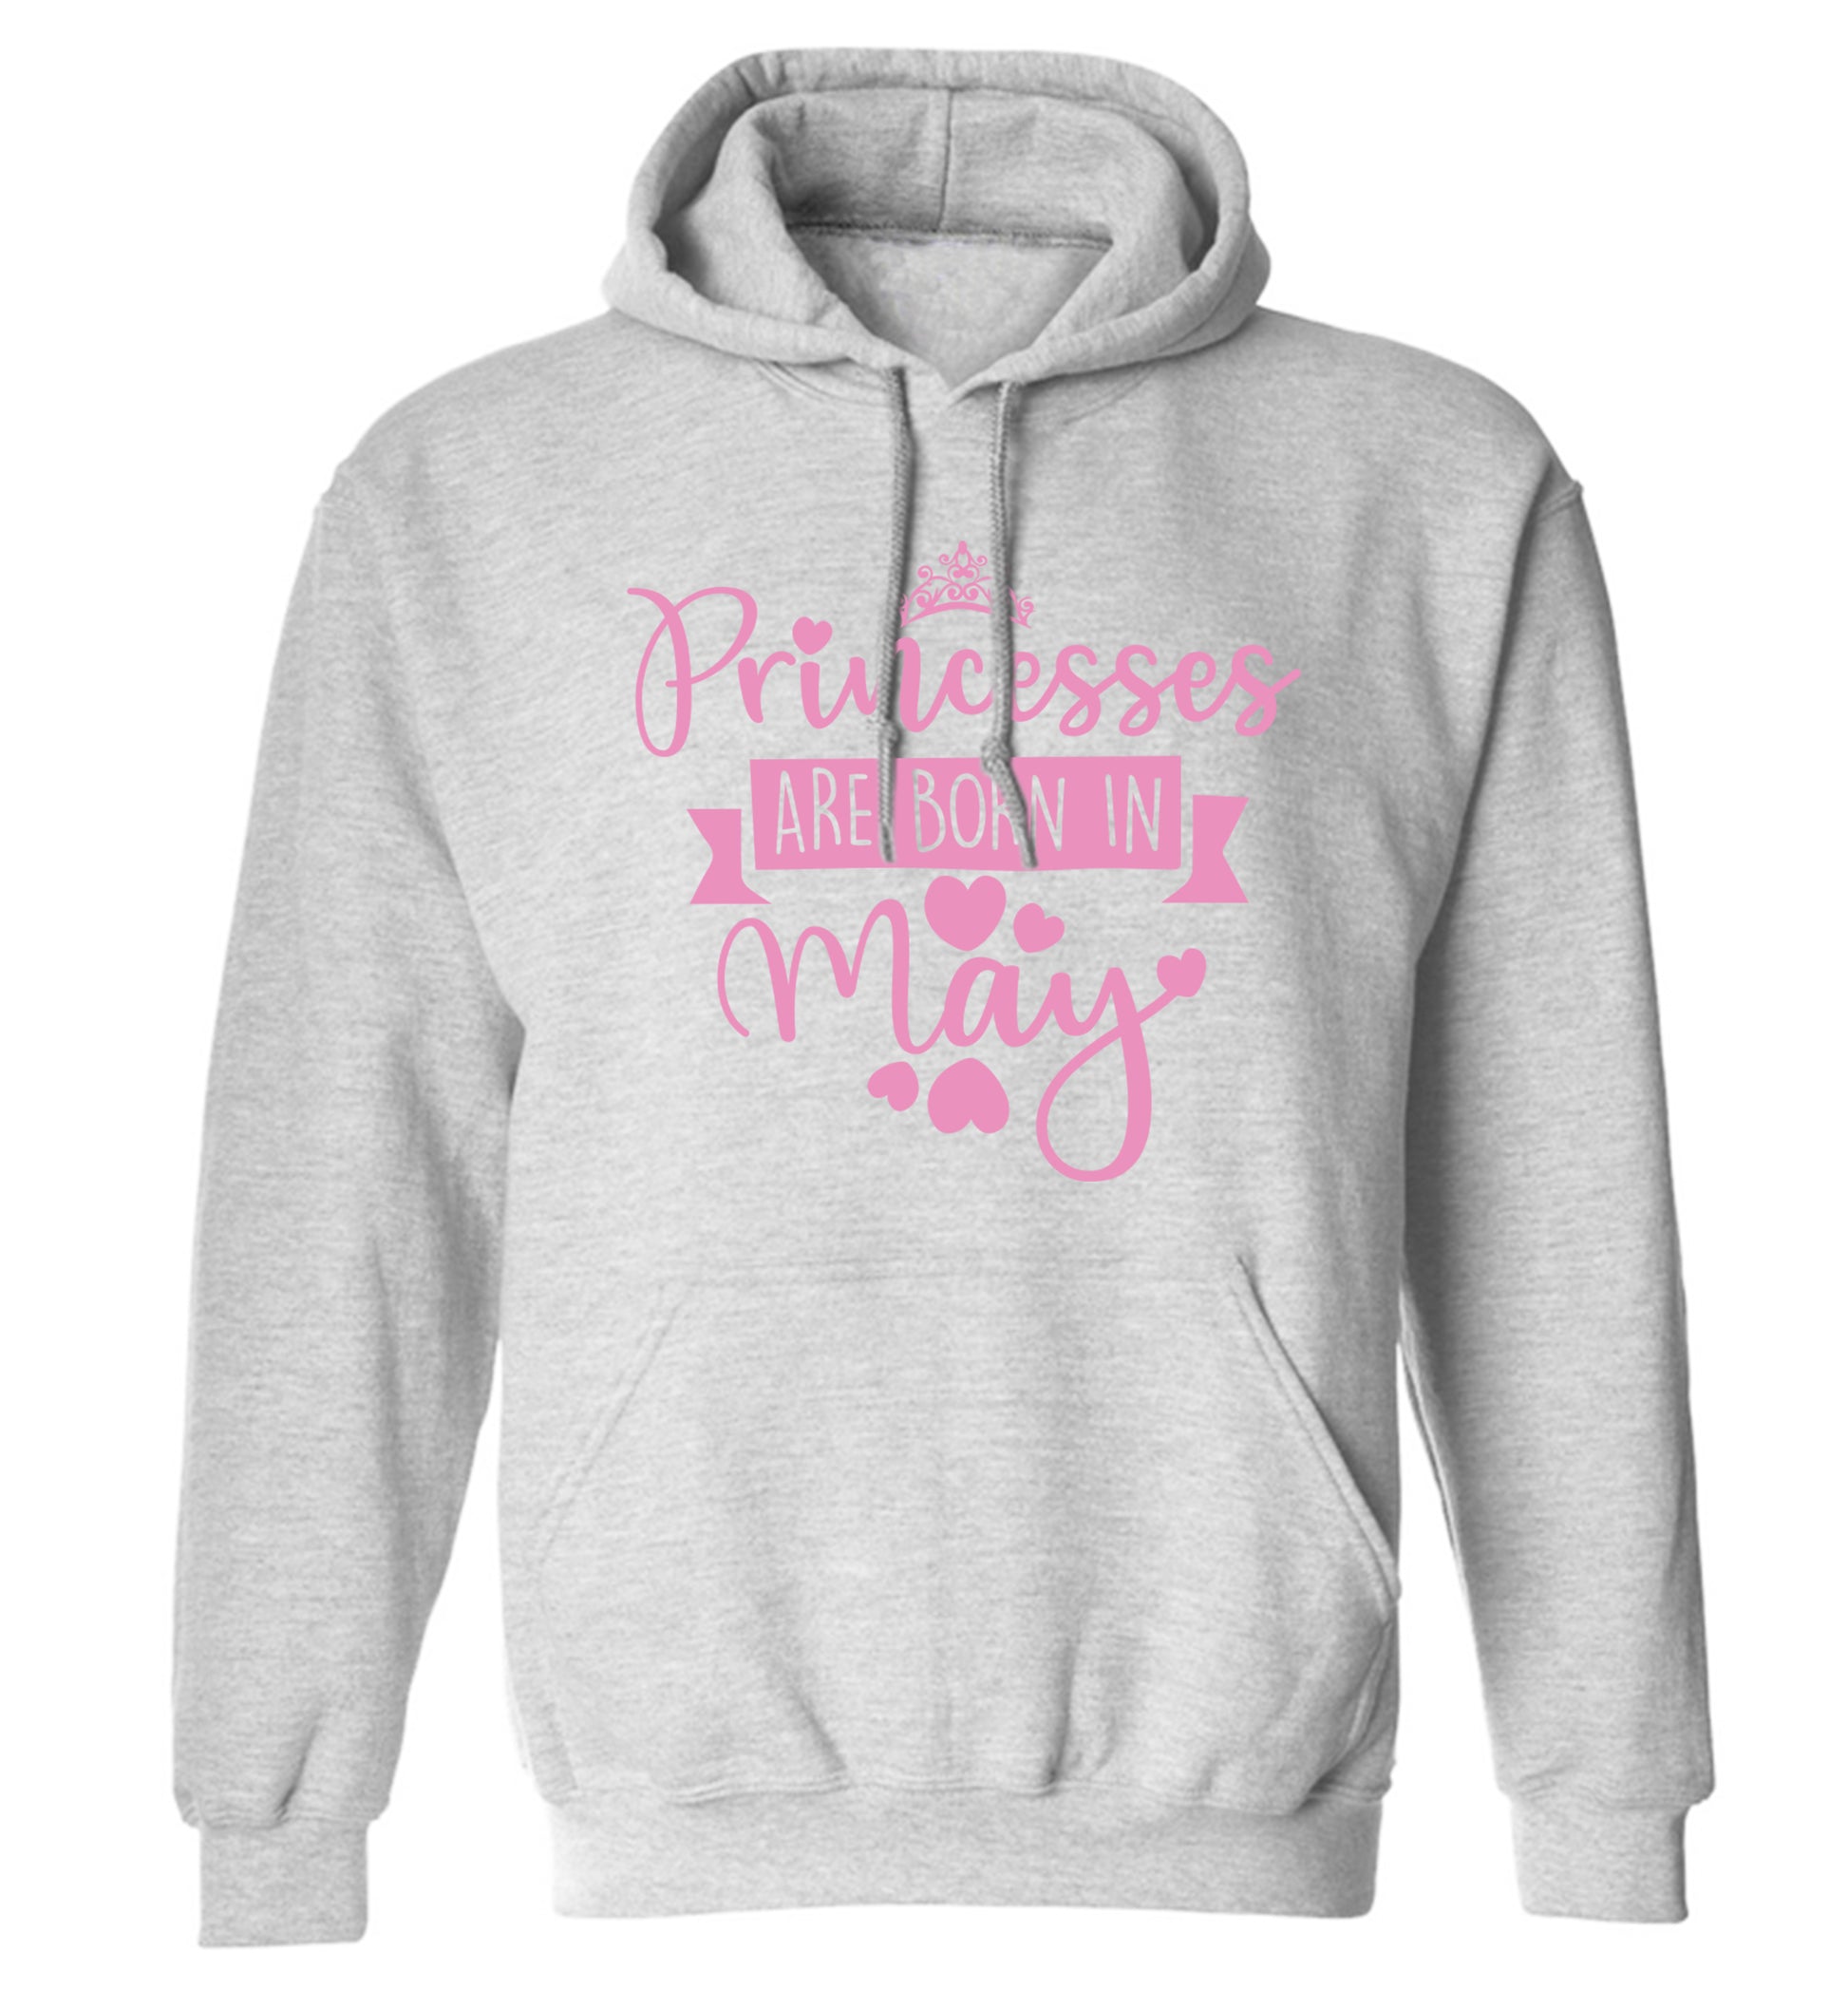 Princesses are born in May adults unisex grey hoodie 2XL